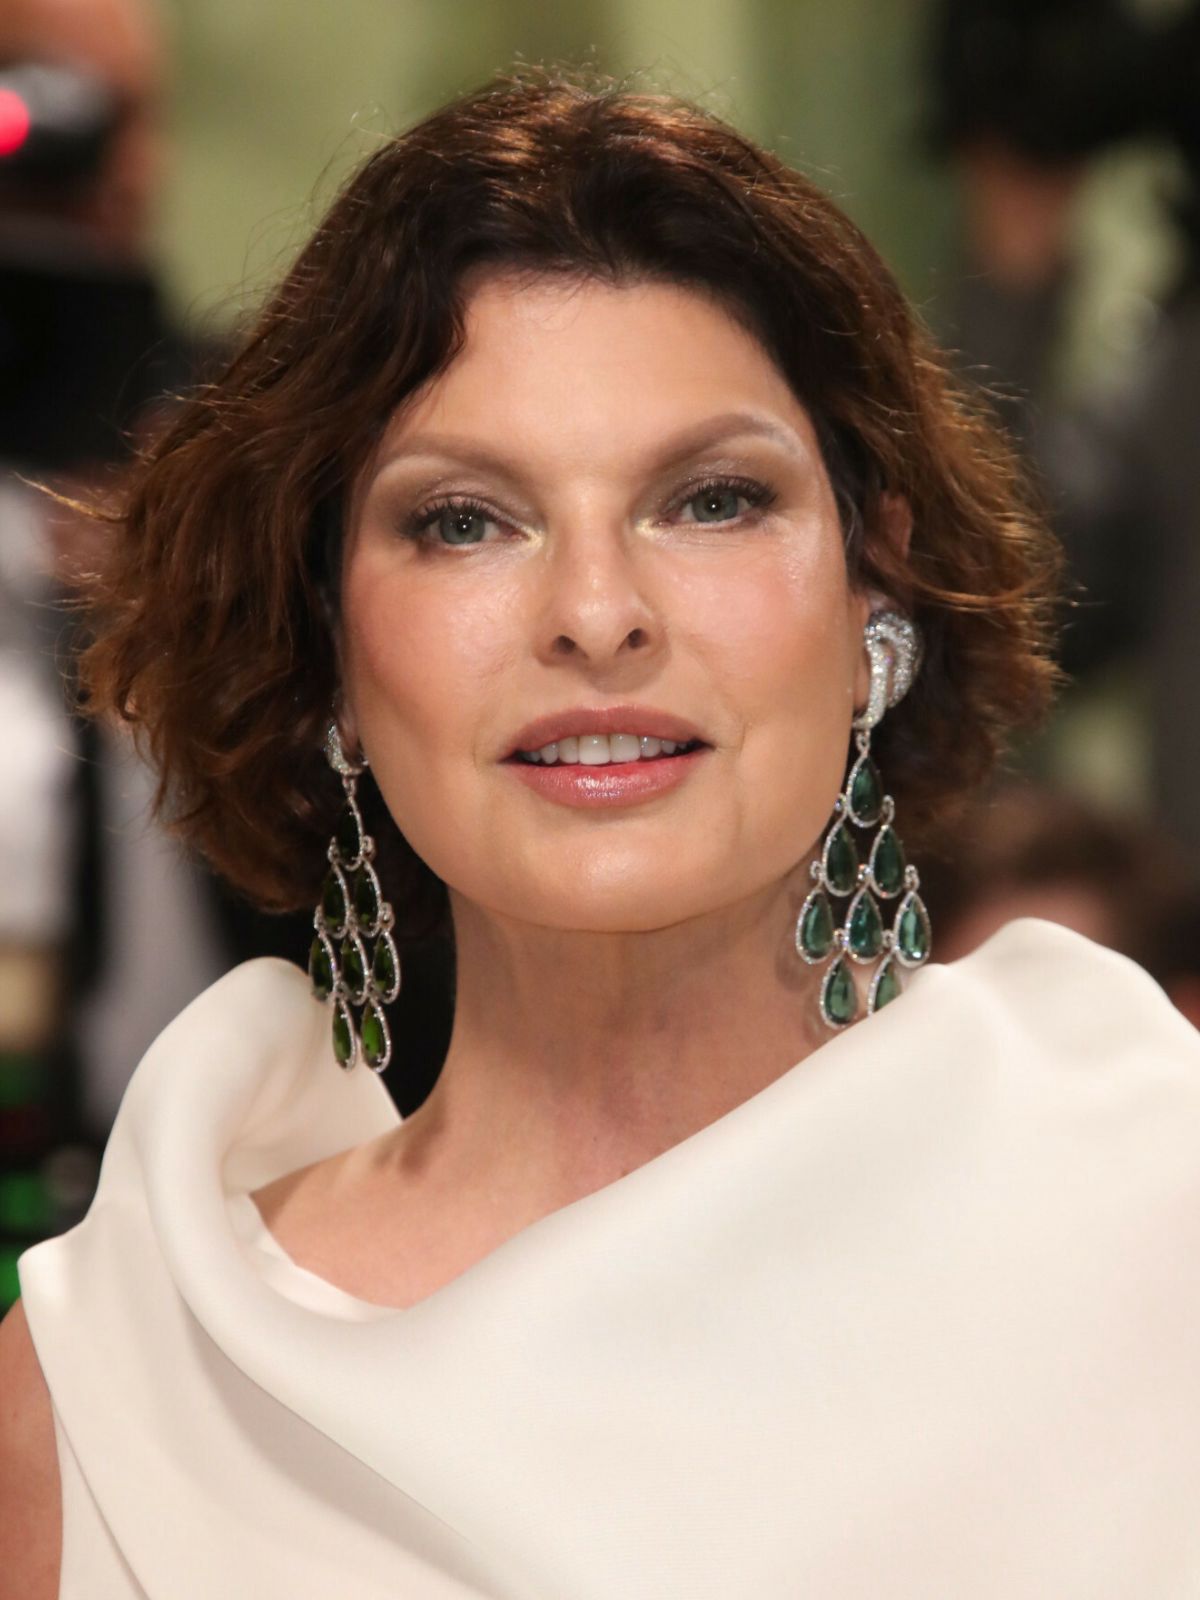 The source text is already in English, so I will not translate it. The text is "Linda Evangelista".